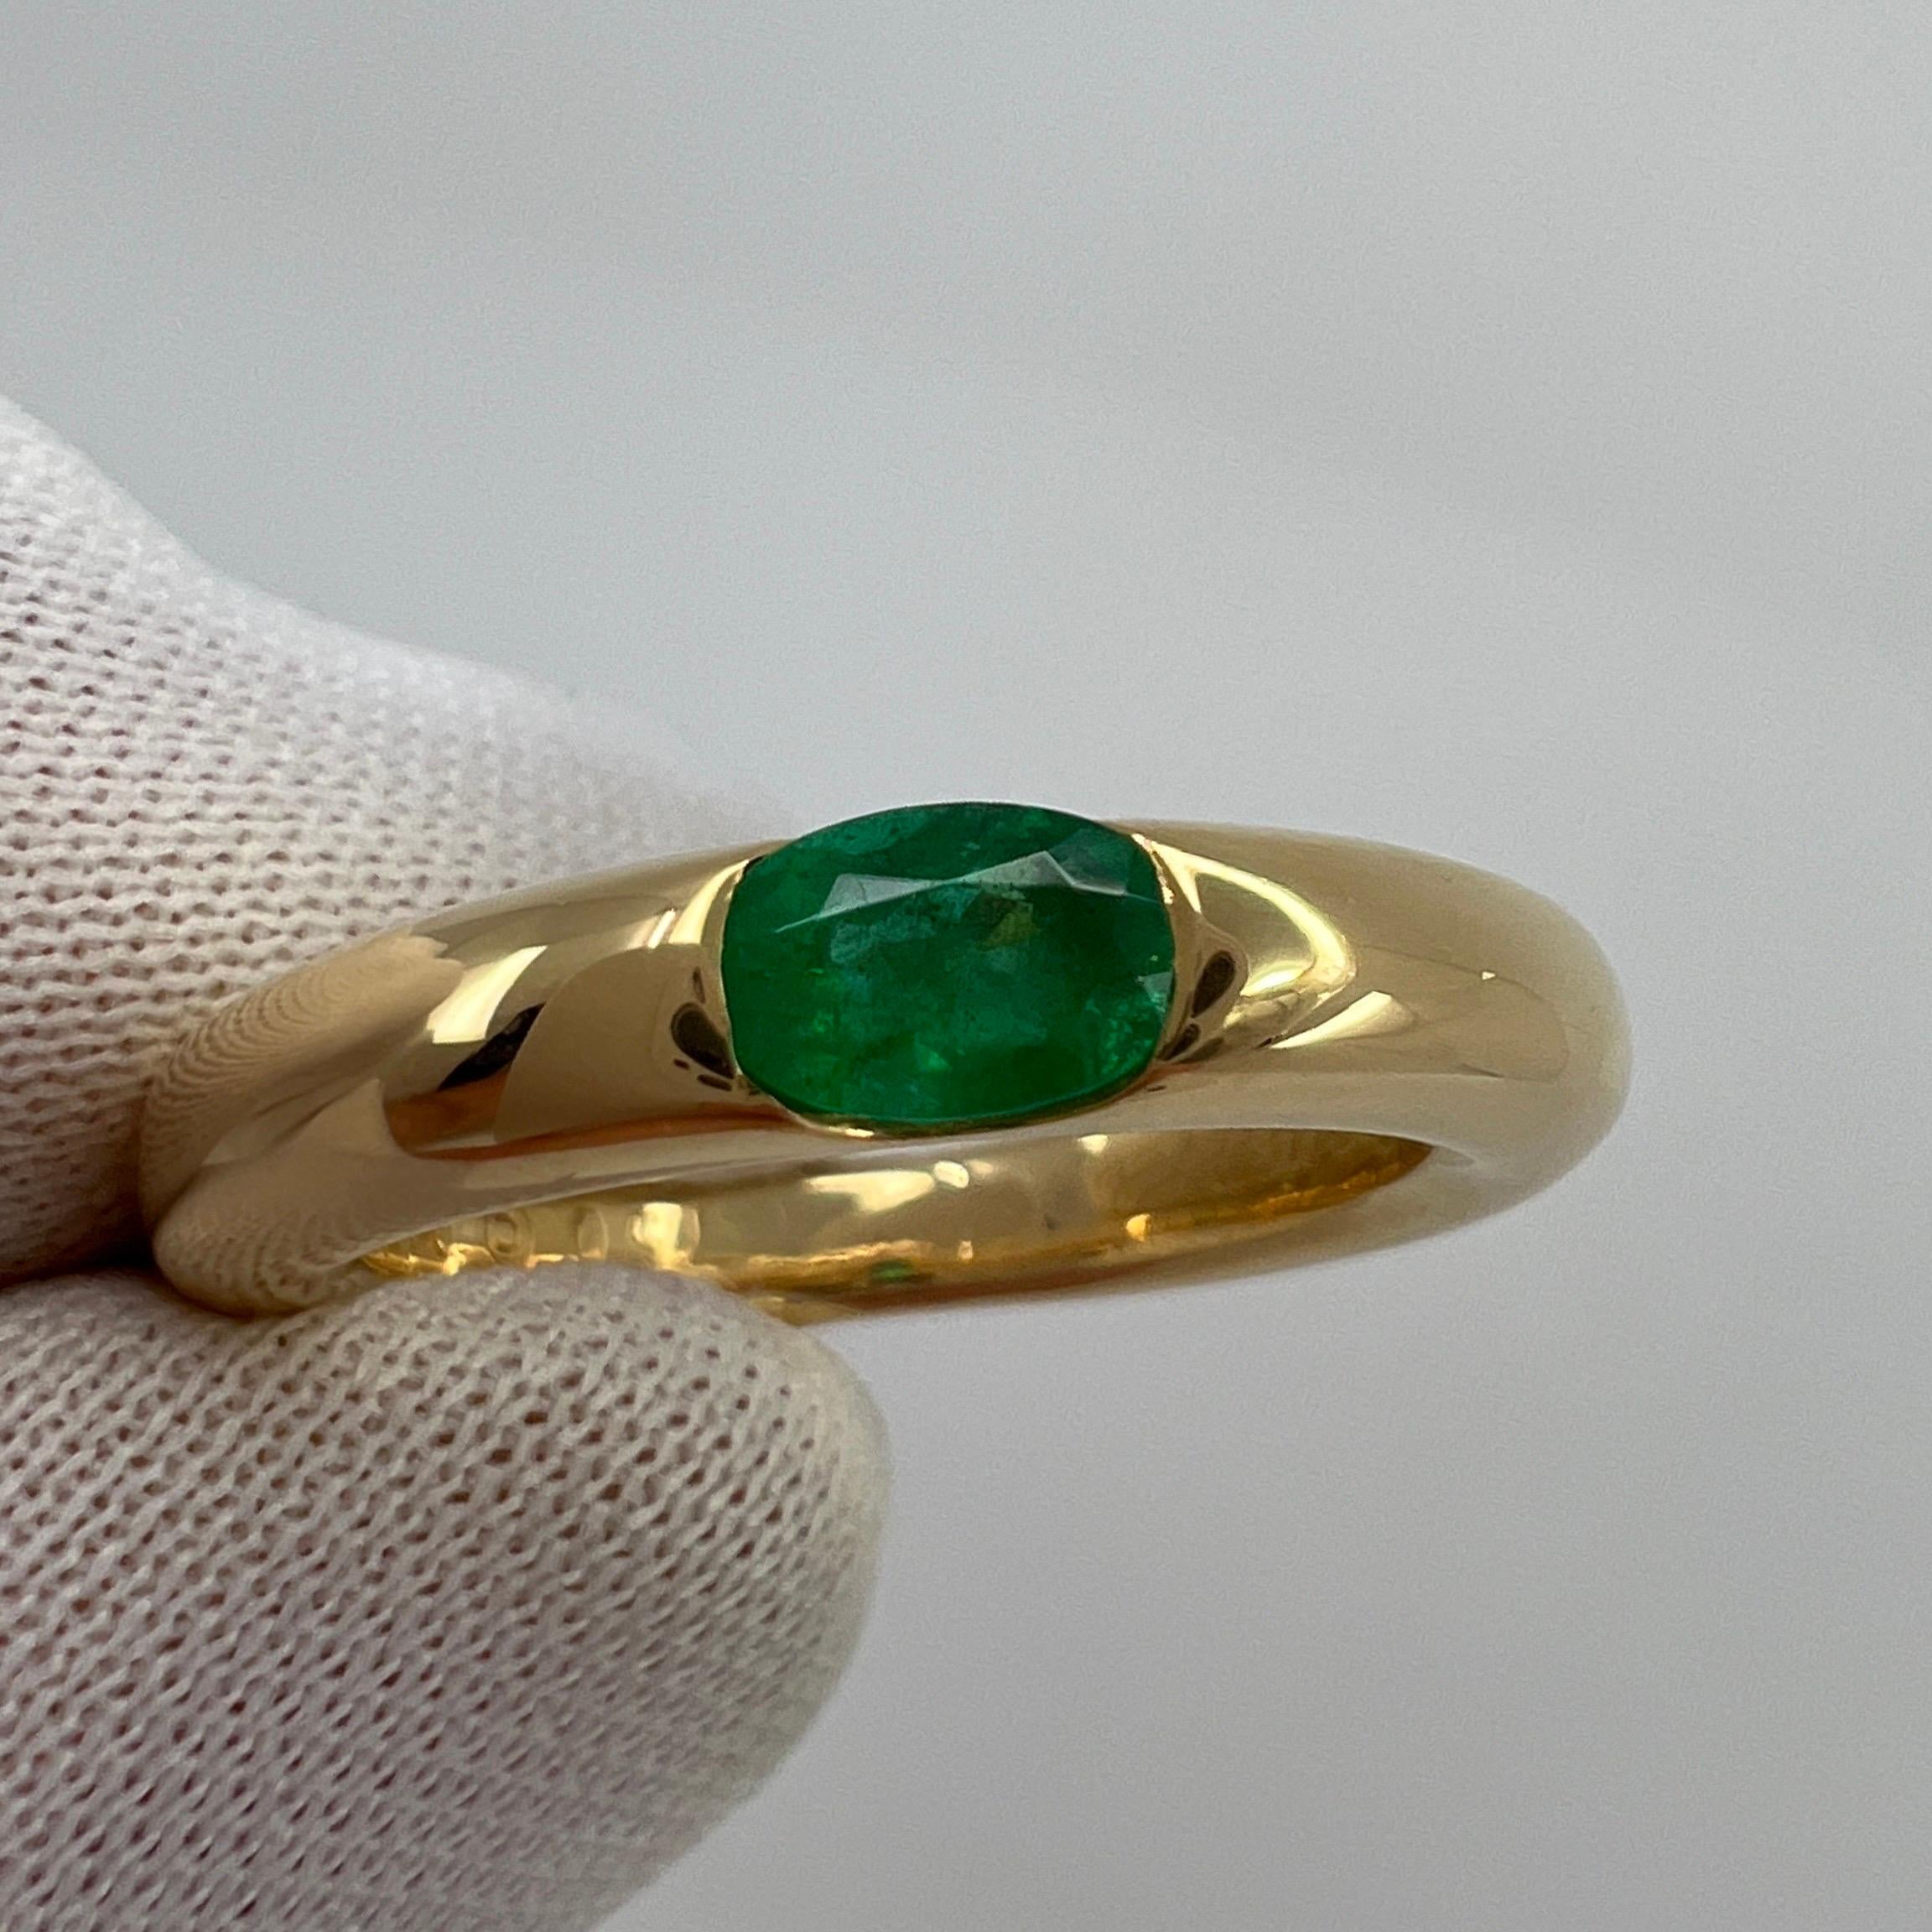 Vintage Cartier Vivid Green Emerald 18k Yellow Gold Solitaire Ring.

Stunning yellow gold Cartier ring set with a fine vivid green emerald. Fine jewellery houses like Cartier only use the finest of gemstones and this emerald is no exception.

An